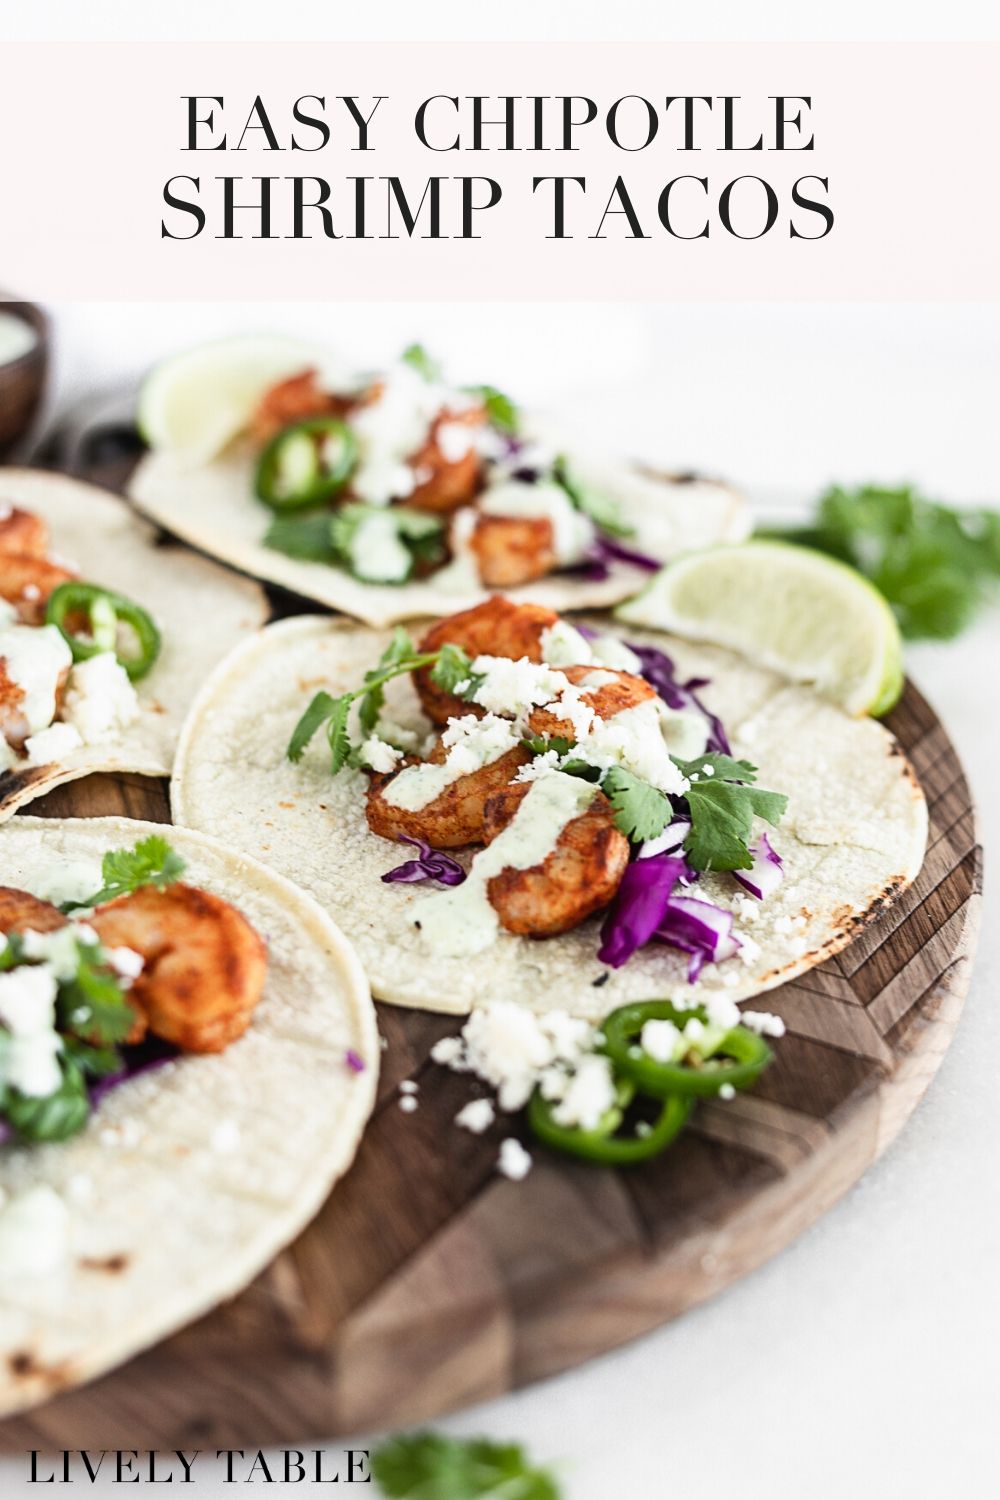 The Easiest Chipotle Shrimp Tacos - Lively Table